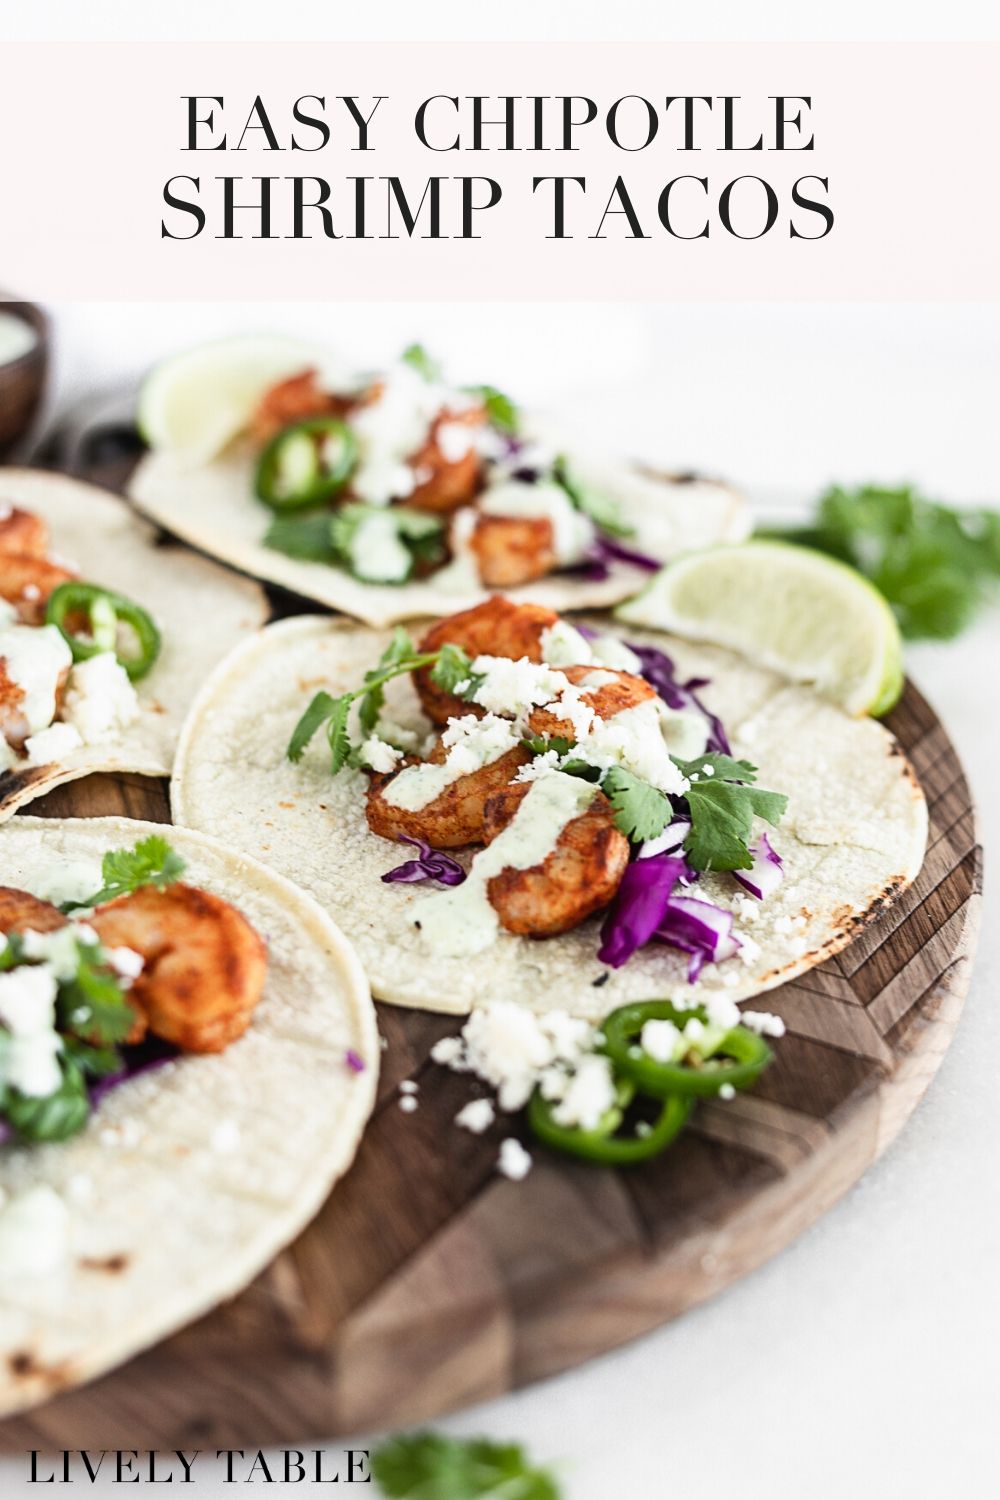 The Easiest Chipotle Shrimp Tacos - Lively Table